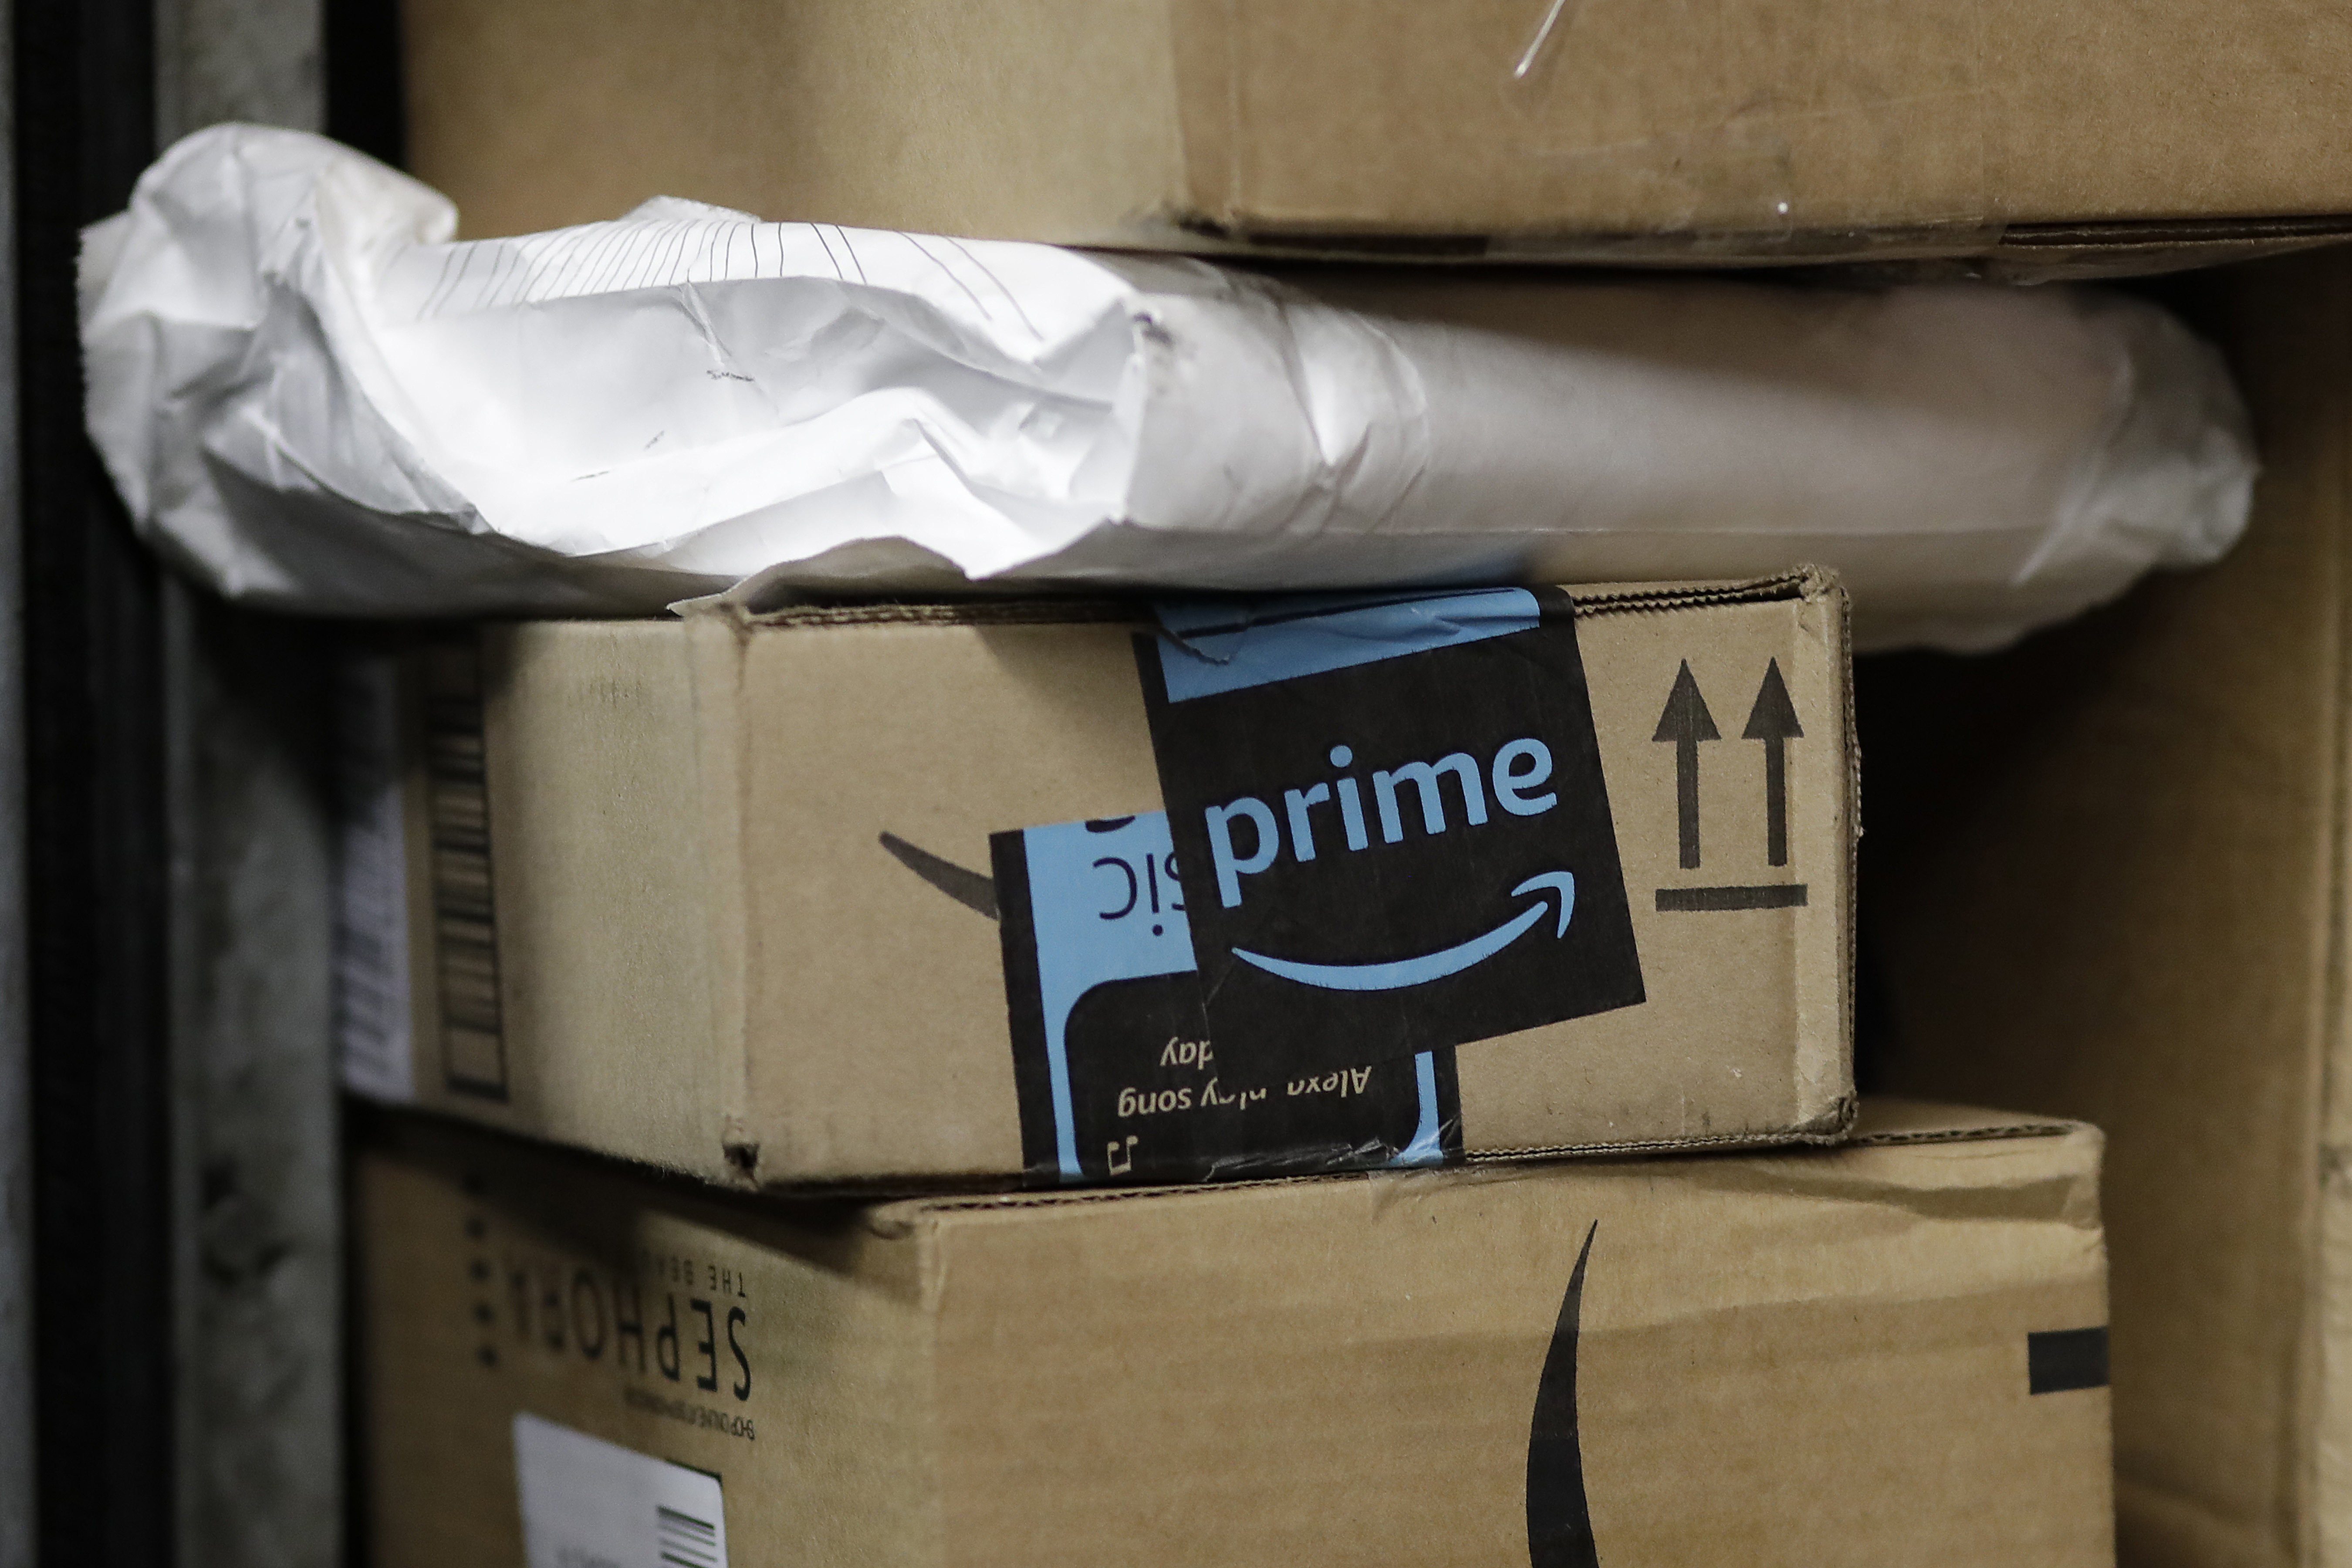 Amazon Might Be Getting Into the Delivery Business